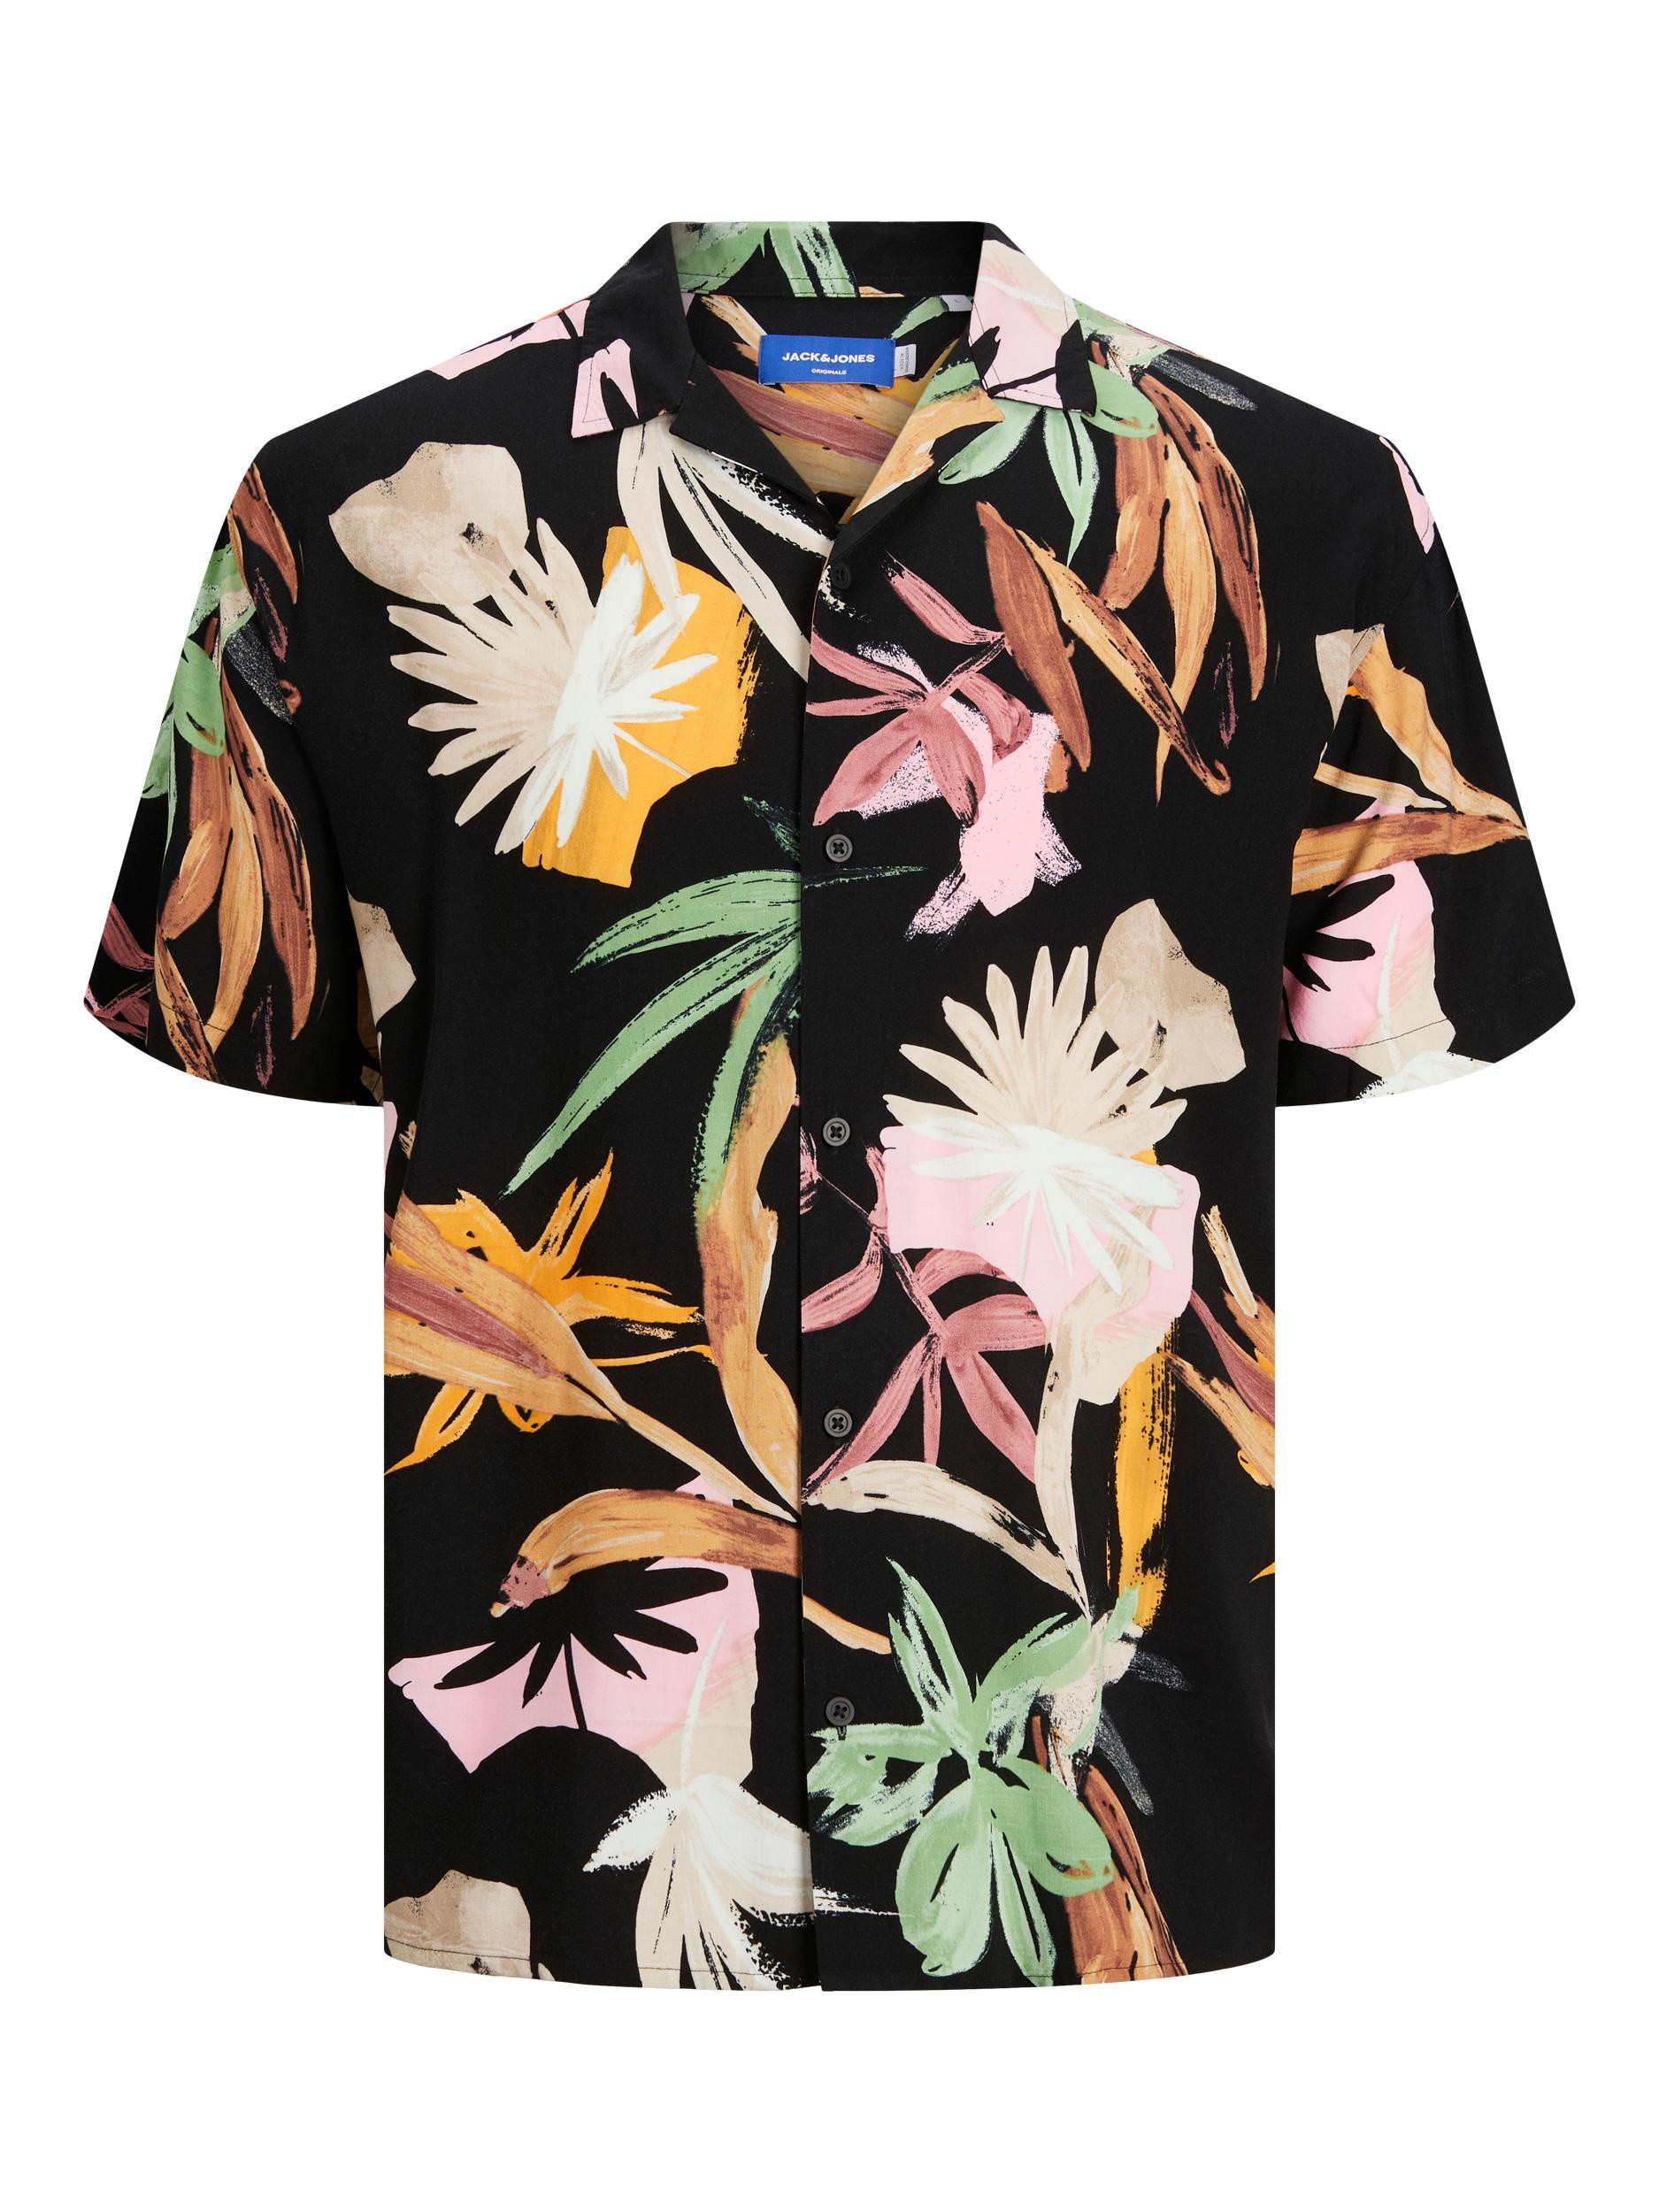 Jack & Jones - Relaxed fit shirt with floral print, Black, large image number 0